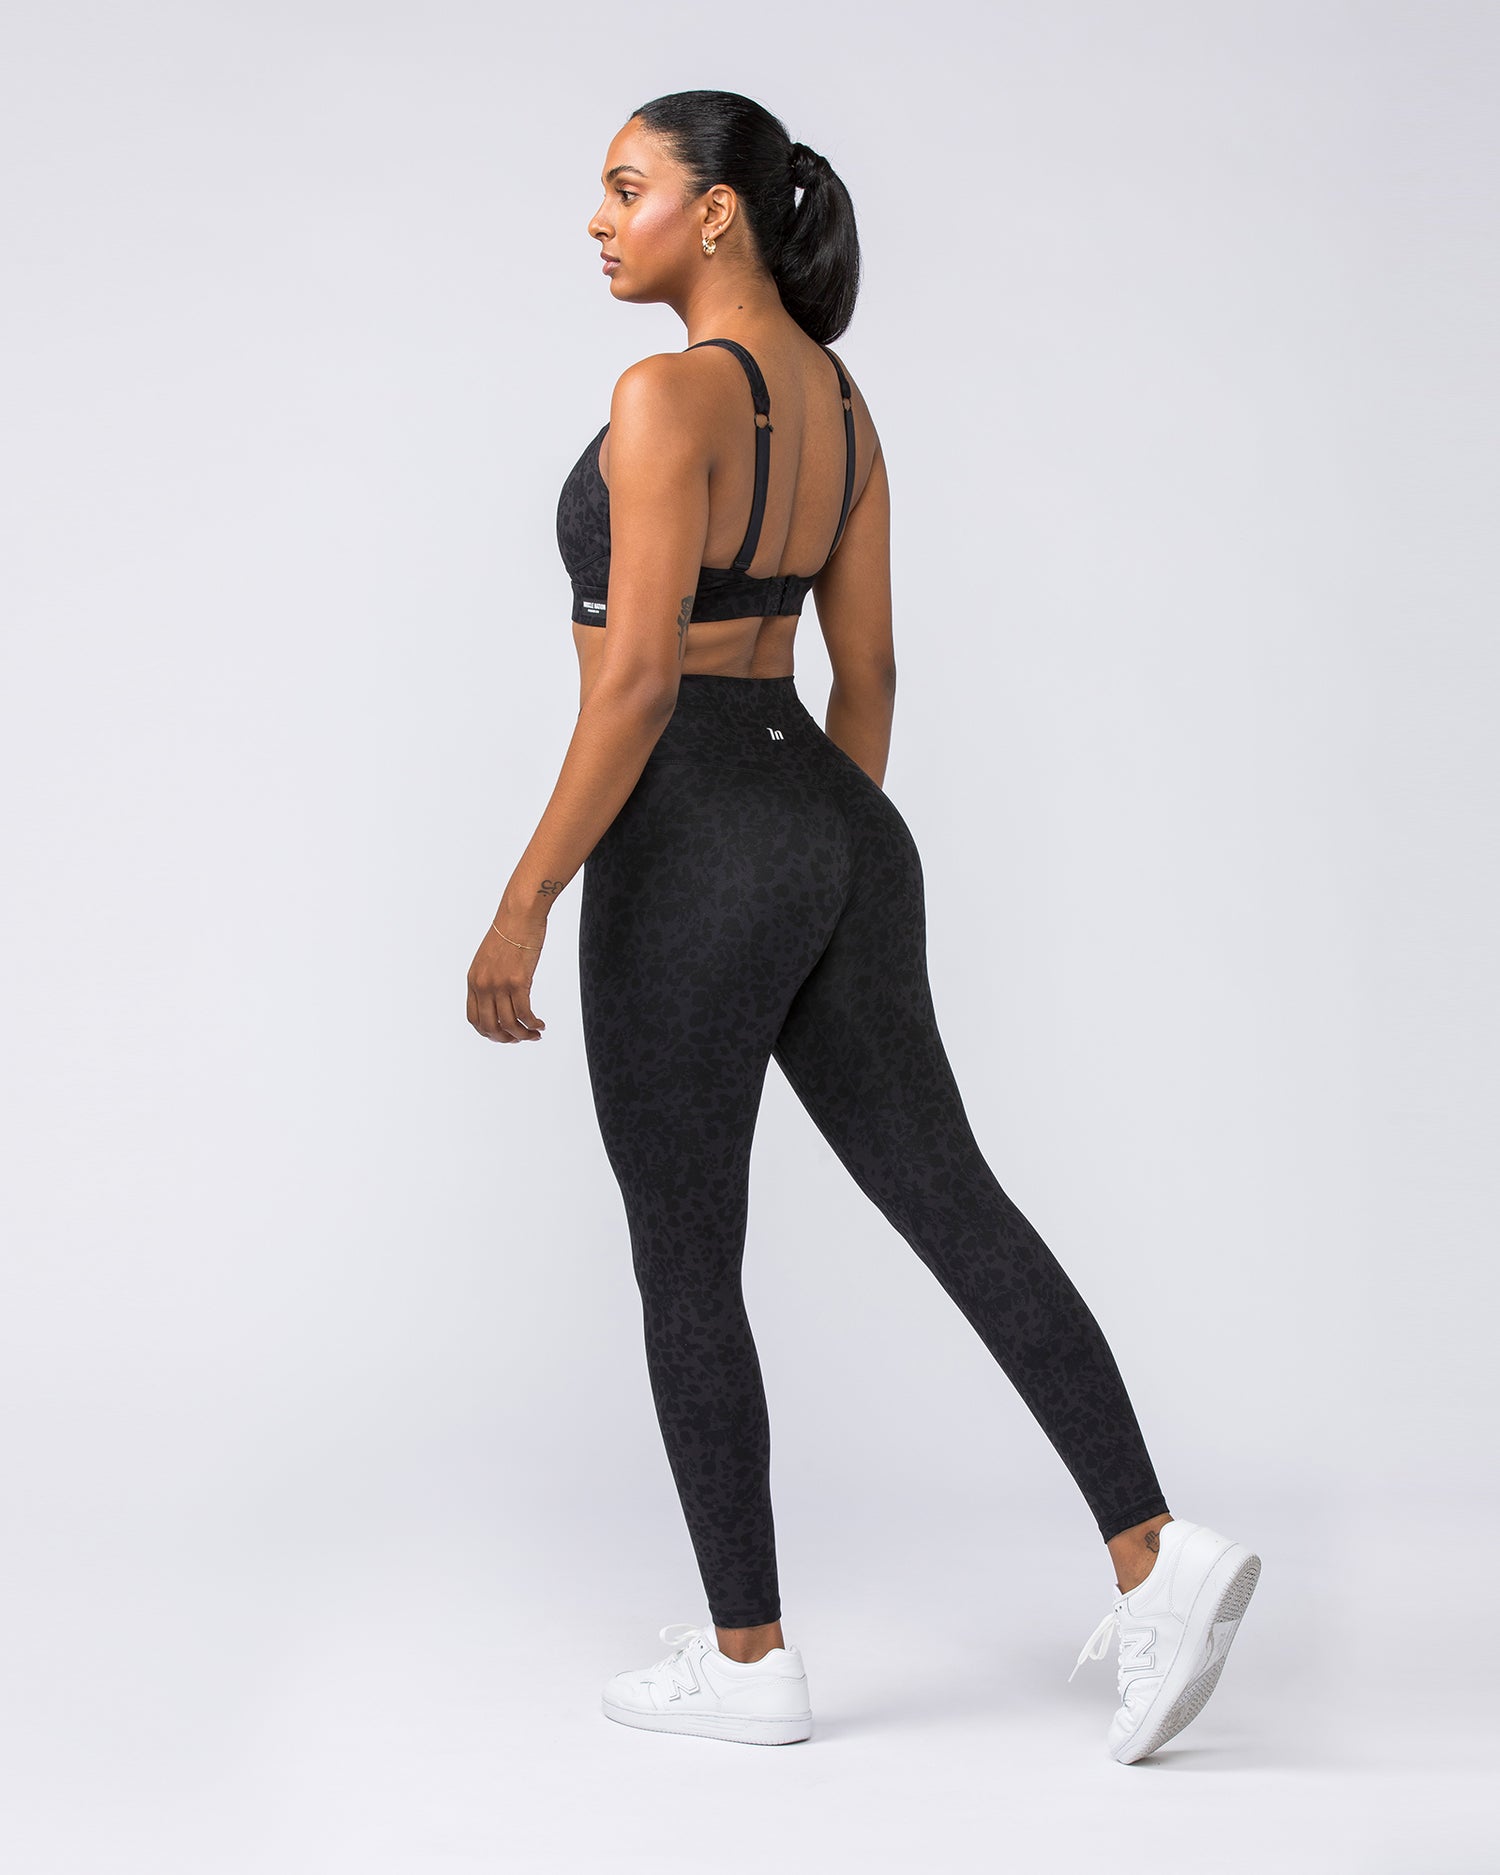 Women's High Waisted Printed Sports Leggings Black Speckled